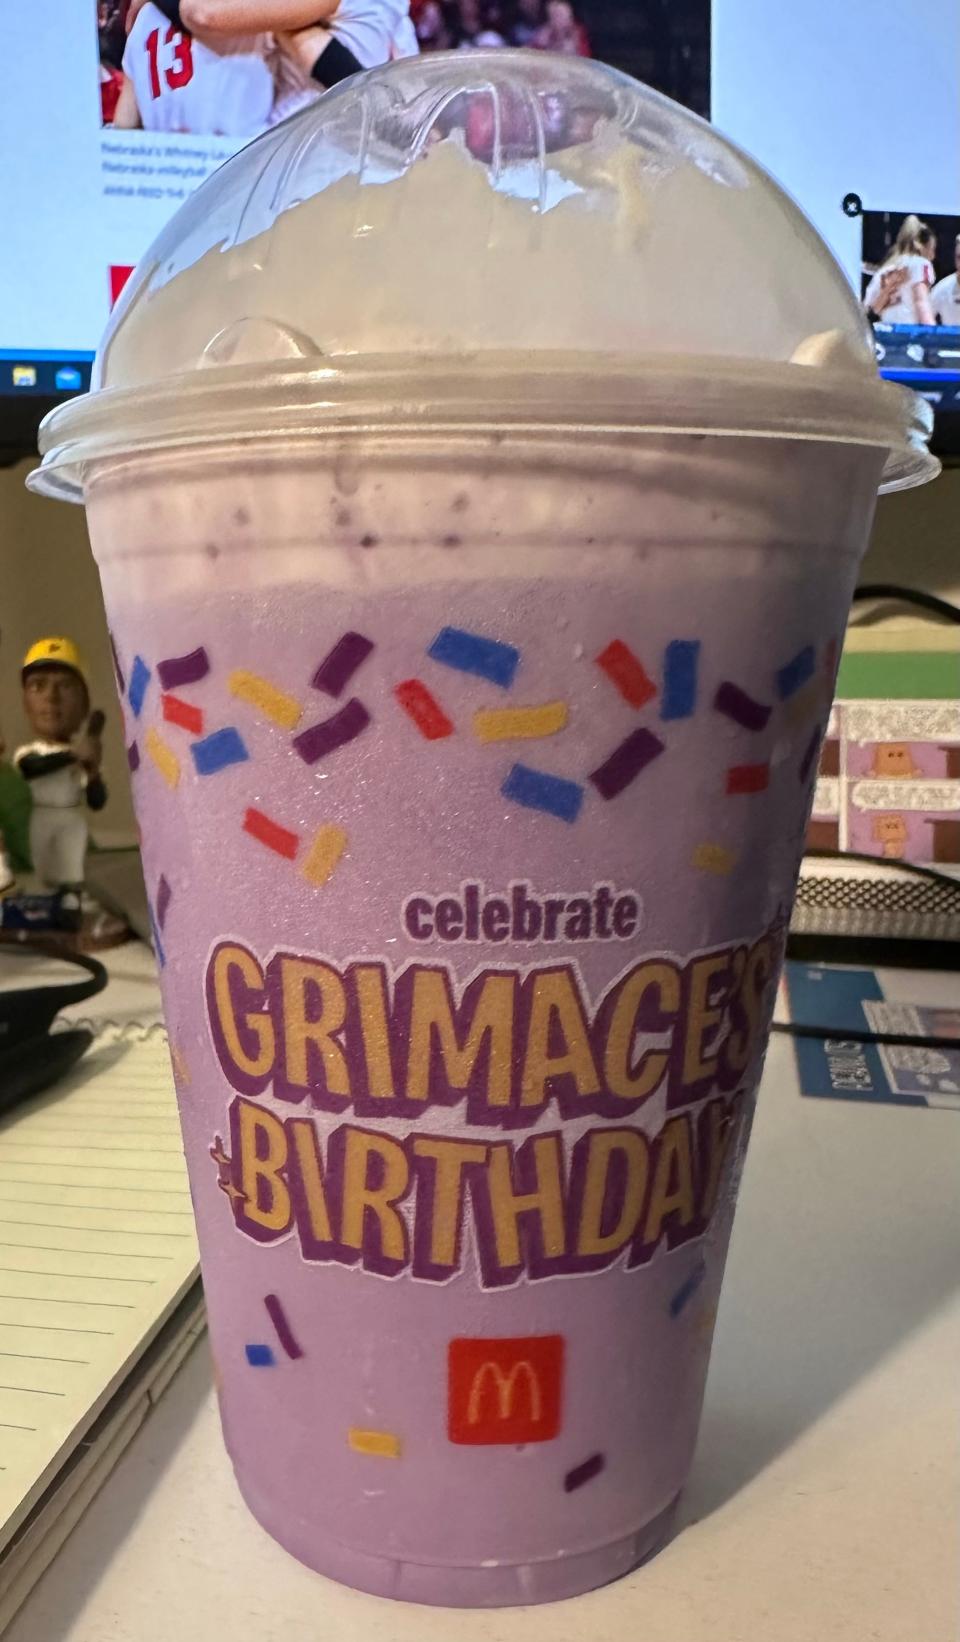 McDonald's Grimace Birthday Shake has a mysterious flavor, but we may